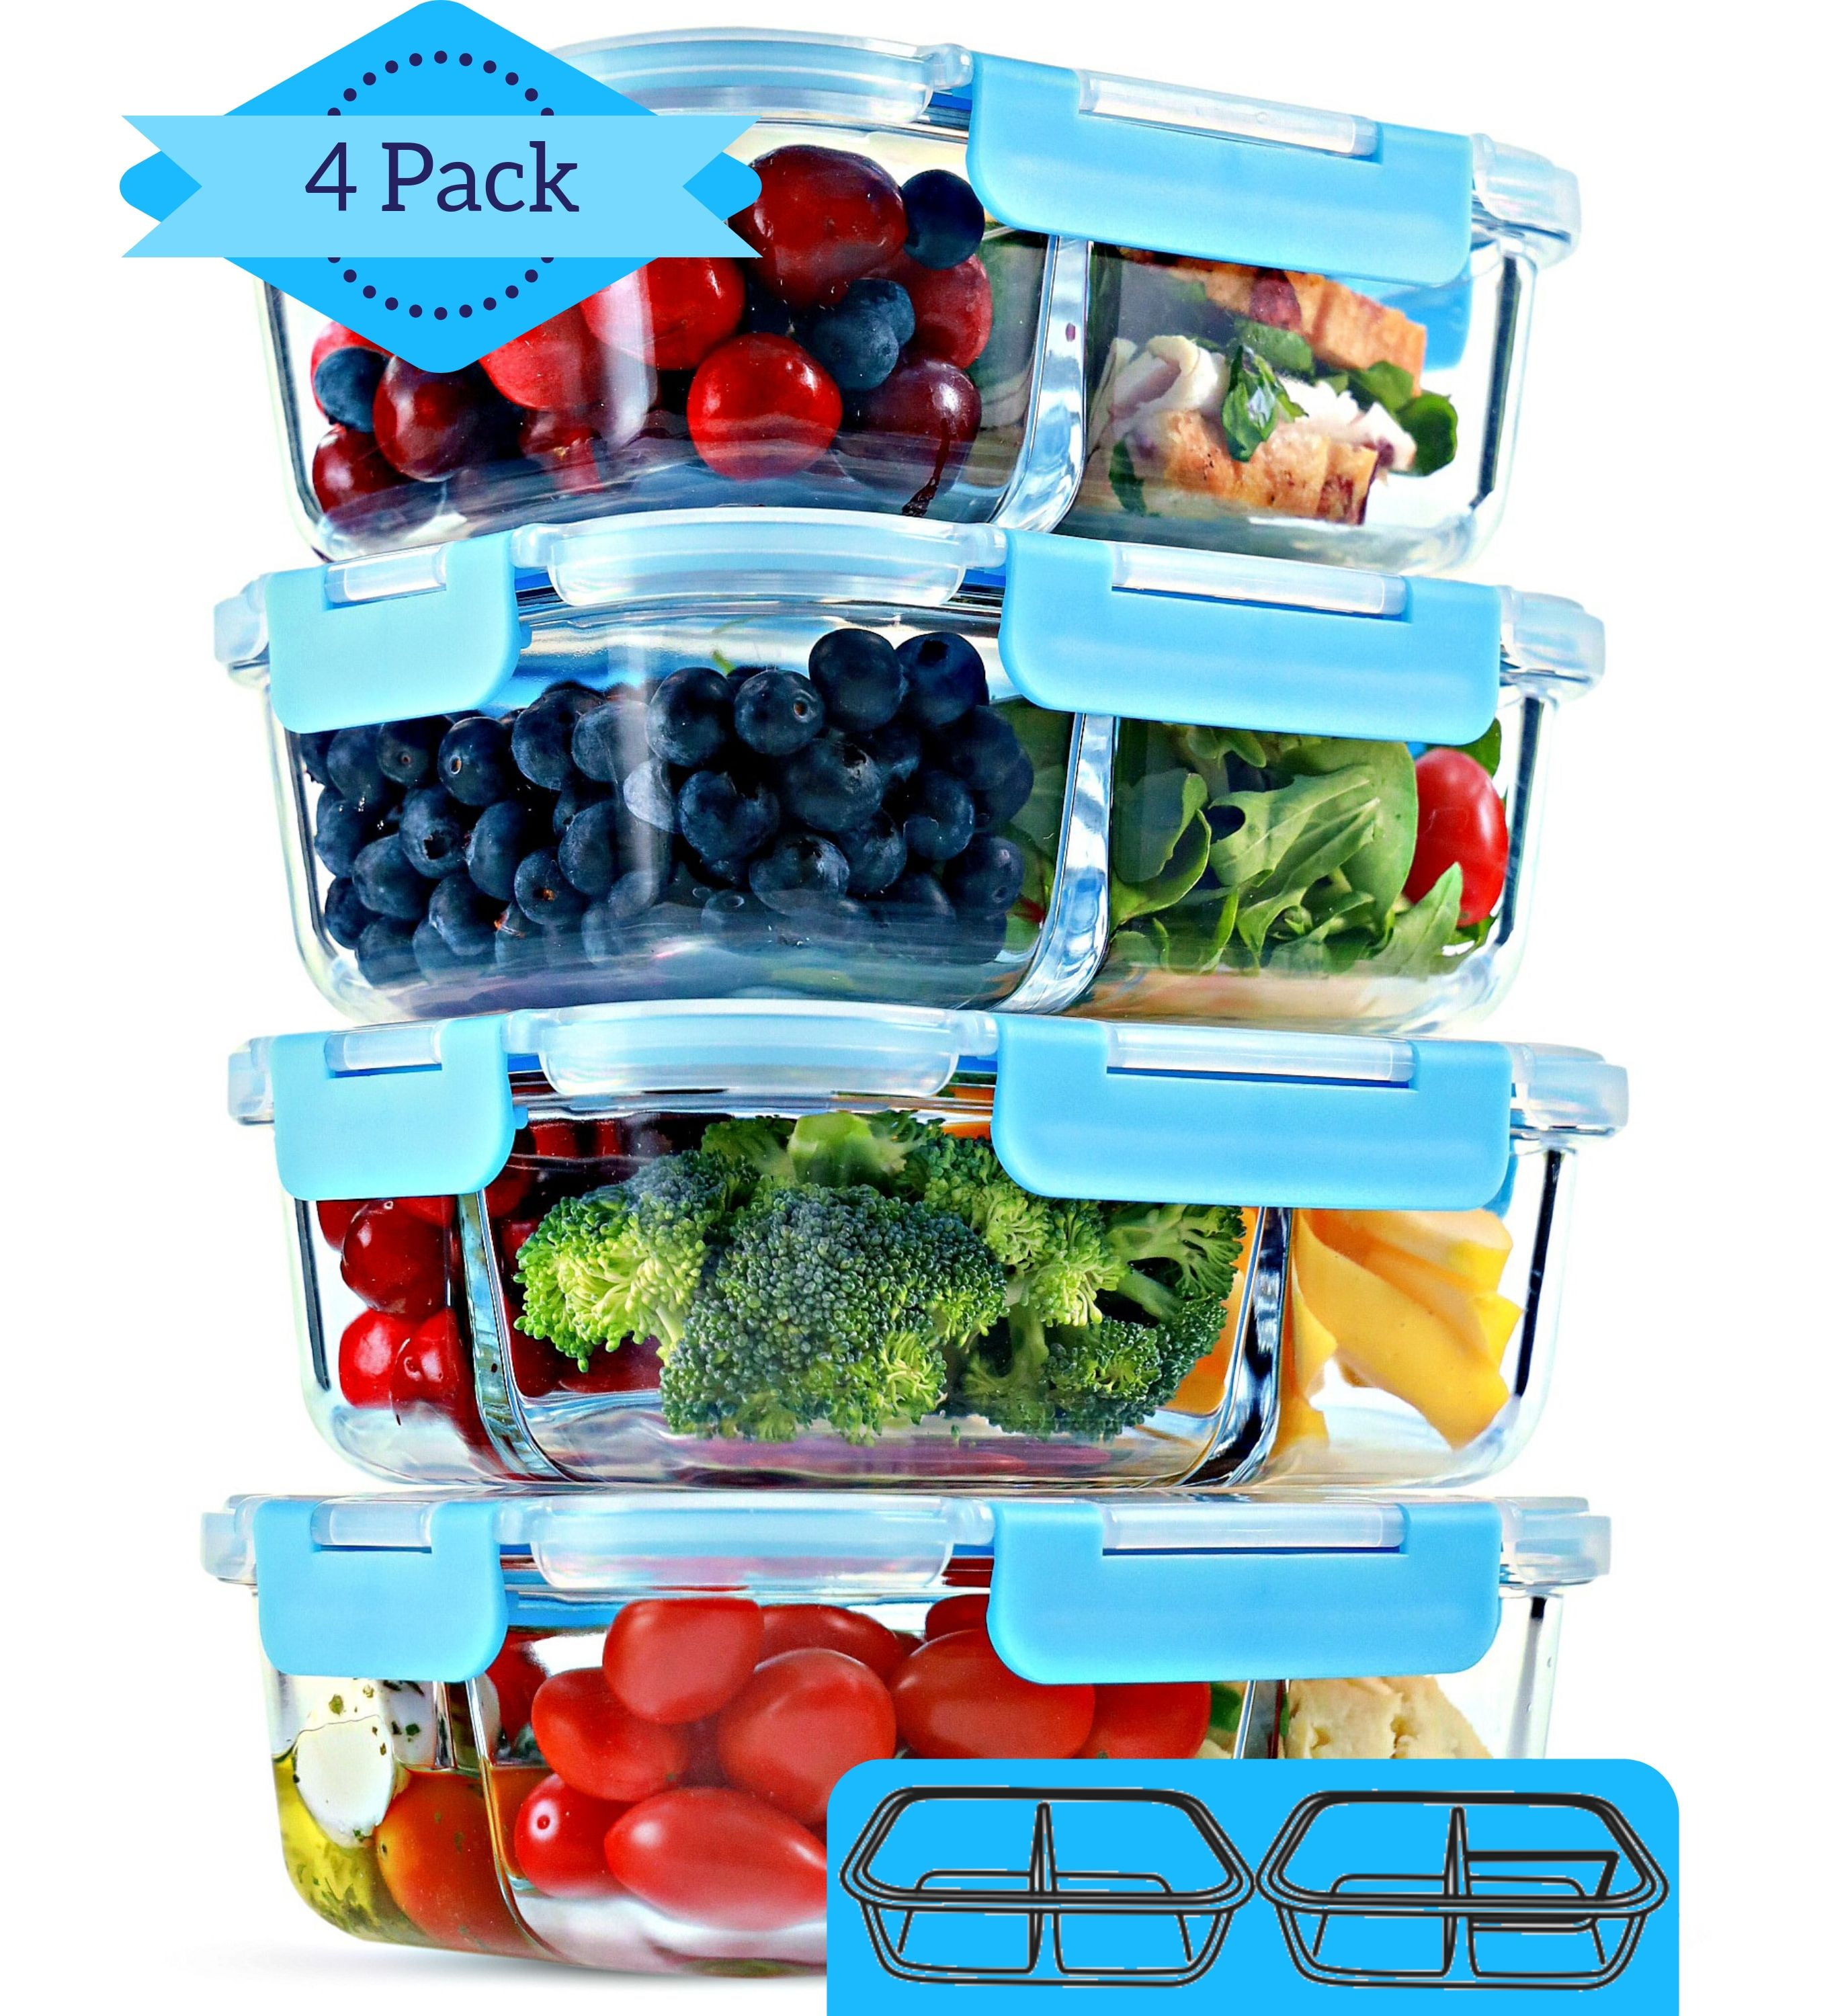 Glass Food Storage Containers 3 Compartment with Lids (5 Pack, 34oz),  Divided Glass Meal Prep Containers for Lunch at Work, Leak-Proof Portion  Control